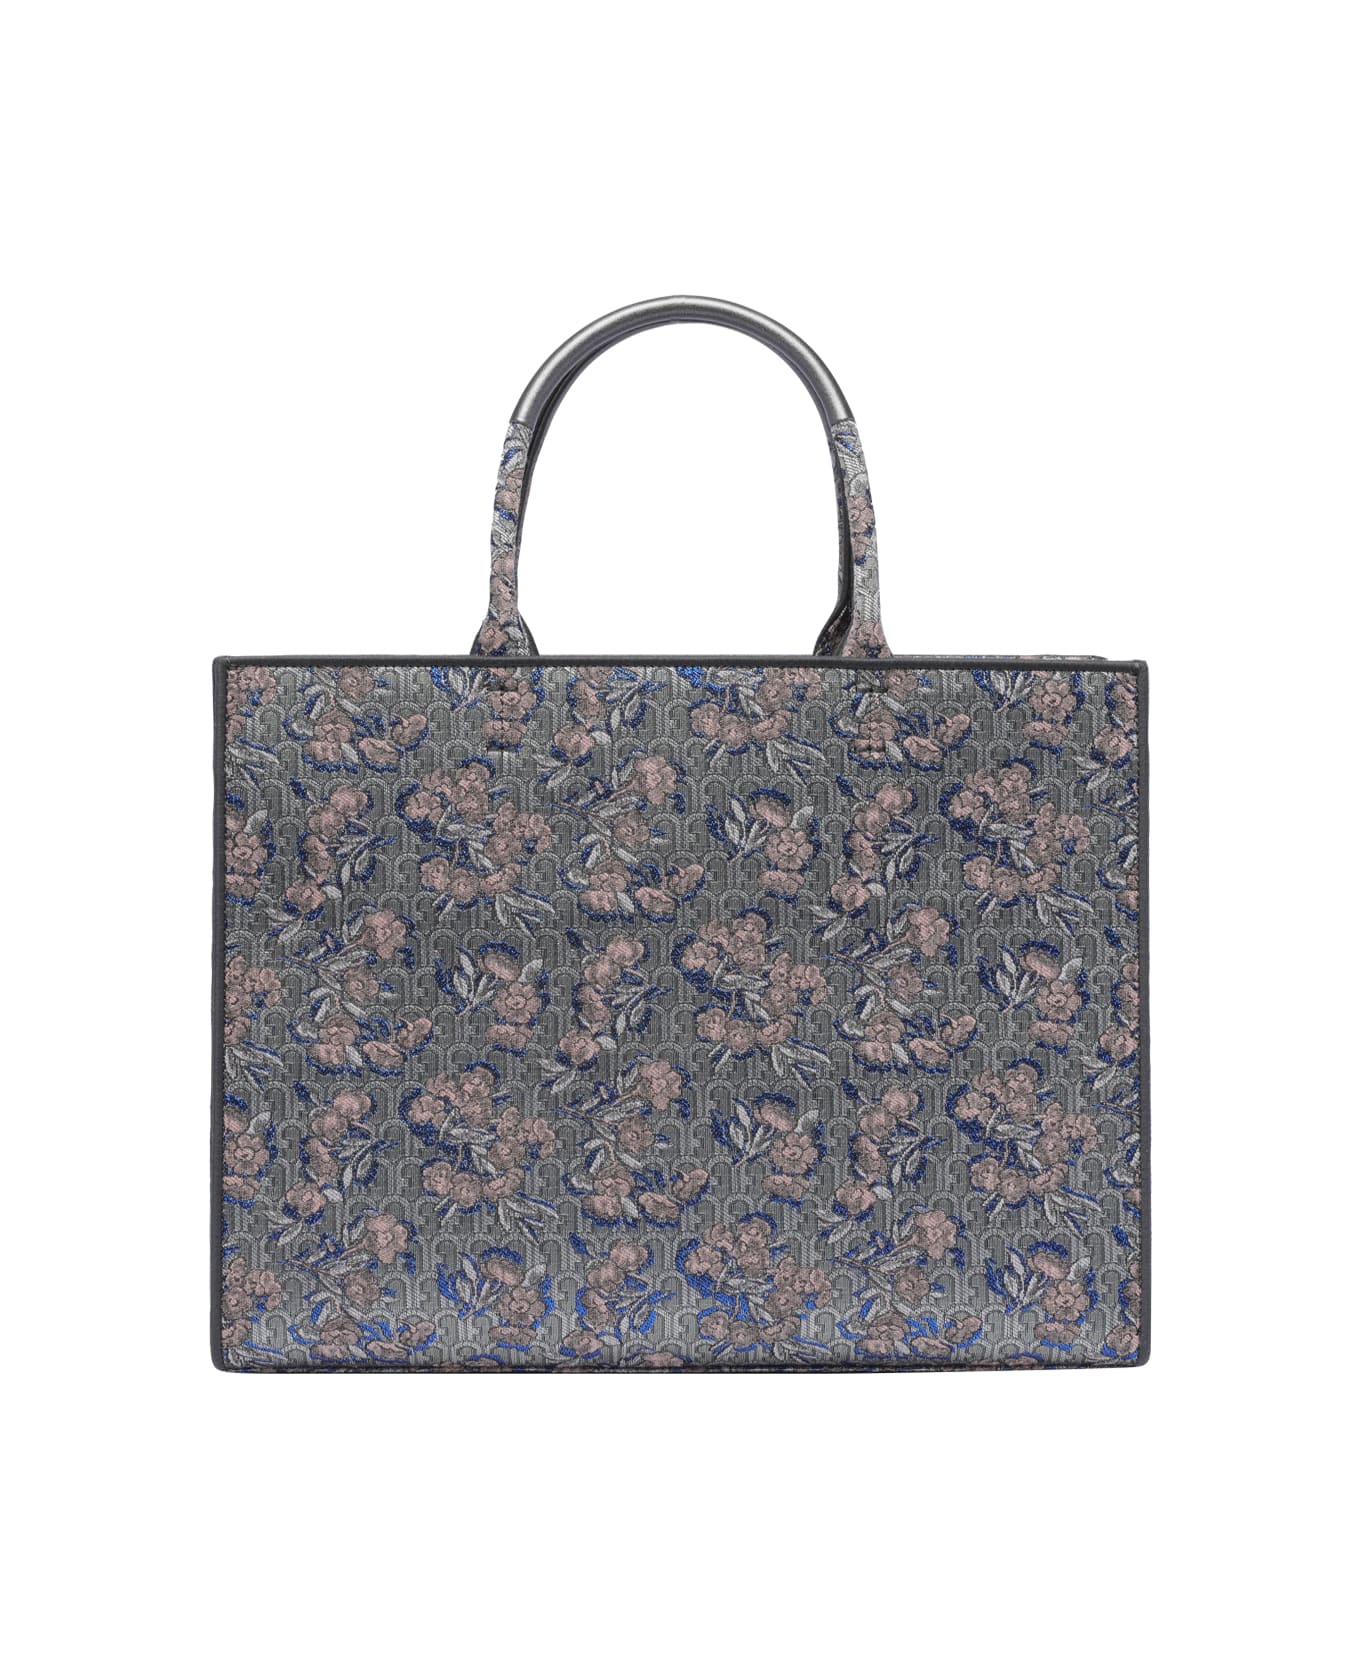 Furla Opportunity Shopping Bag - Toni Color Silver トートバッグ